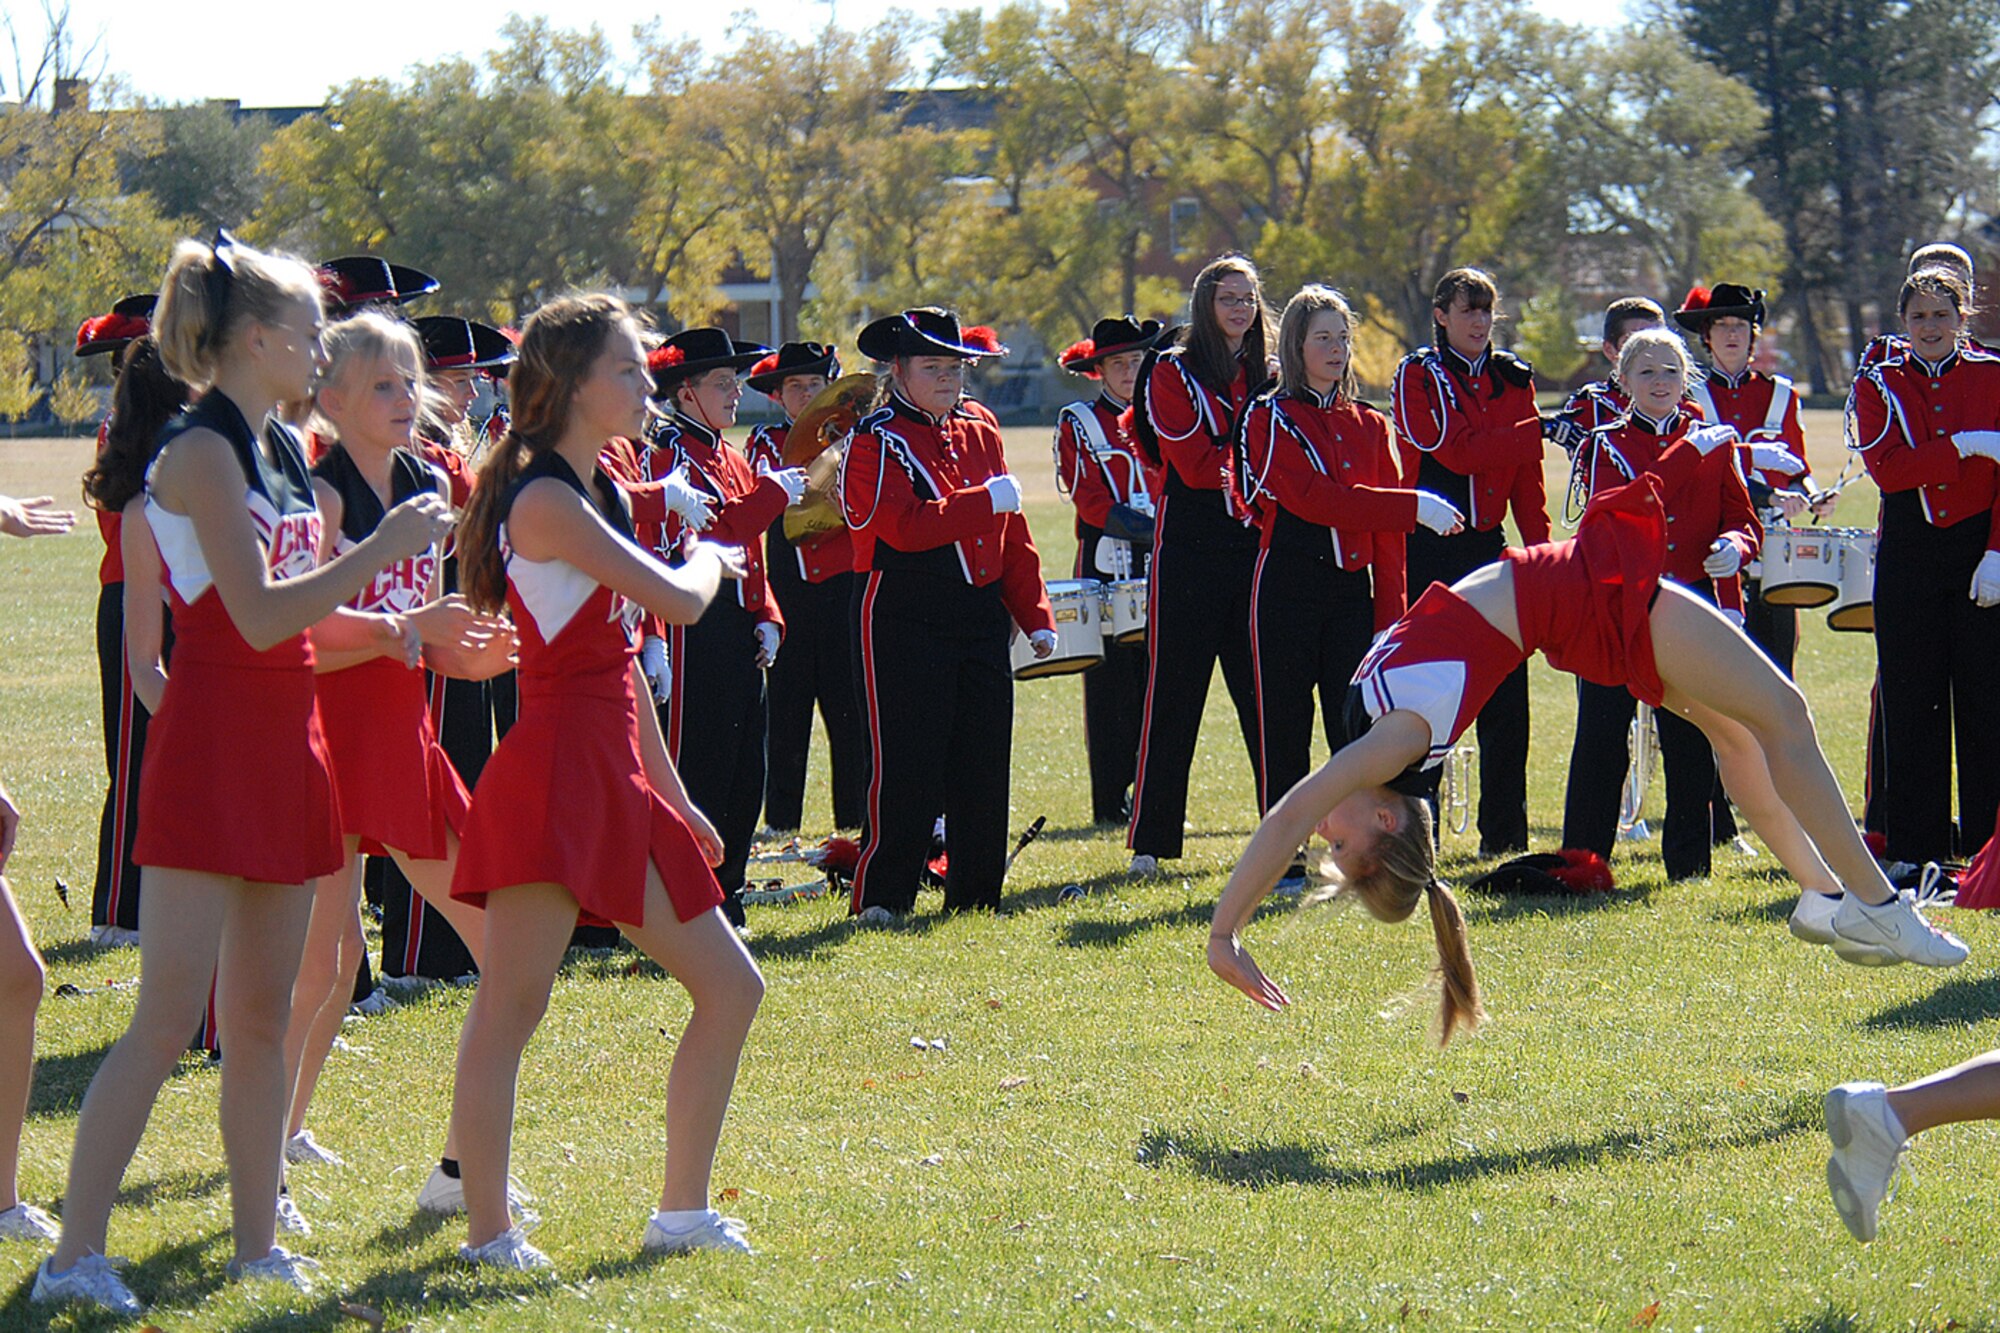 Jenna Farrester, a 12th grader at Cheyenne Central High School, completes a back-flip during the Red Ribbon Week parade. The Cheyenne Central High School cheerleaders and band performed during the parade.